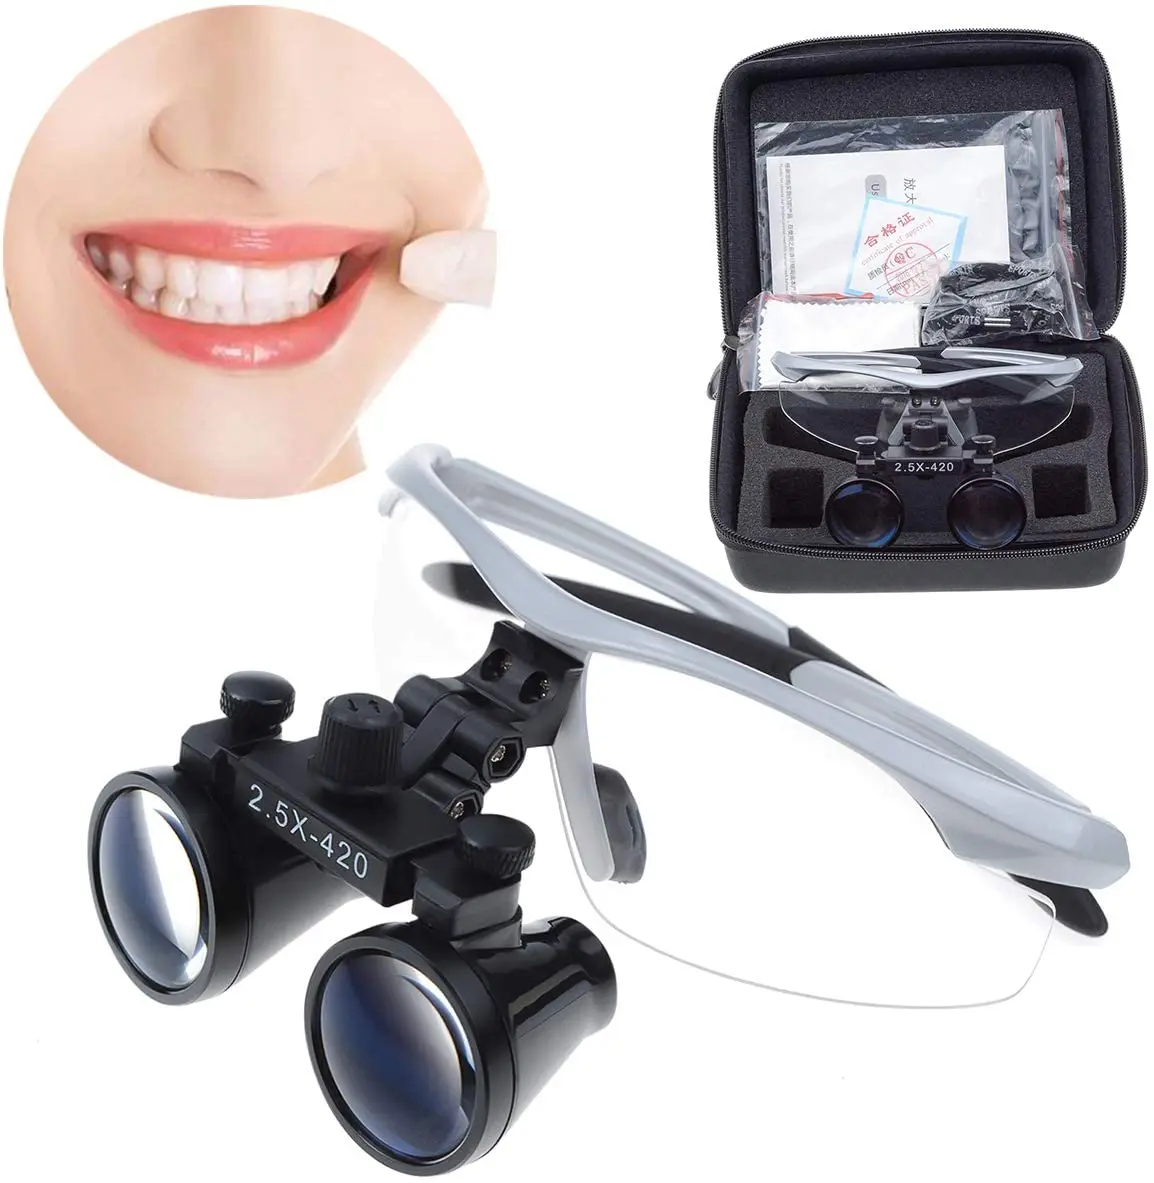 

Dental Equipment Tools Plastic Frame with 3.5X-420 Loupe